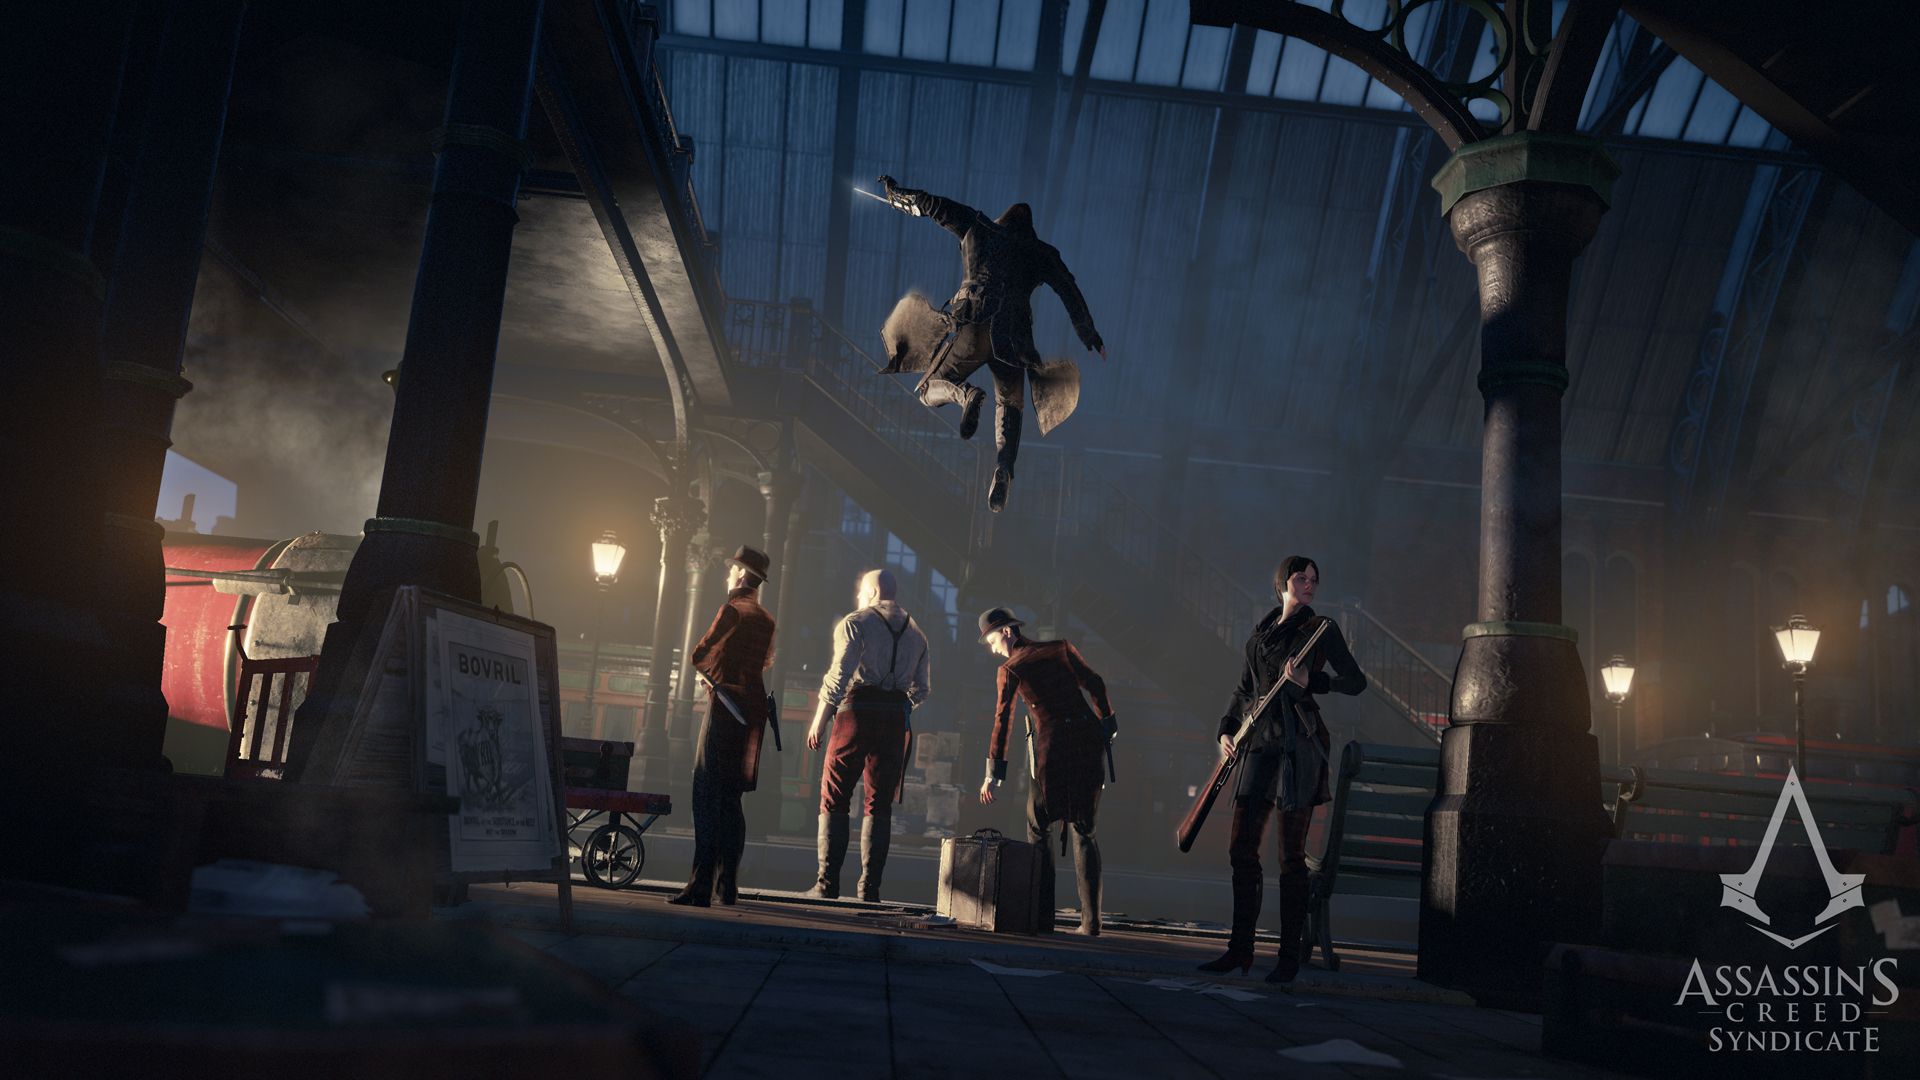 Assassin's Creed Syndicate assassination gameplay screenshot